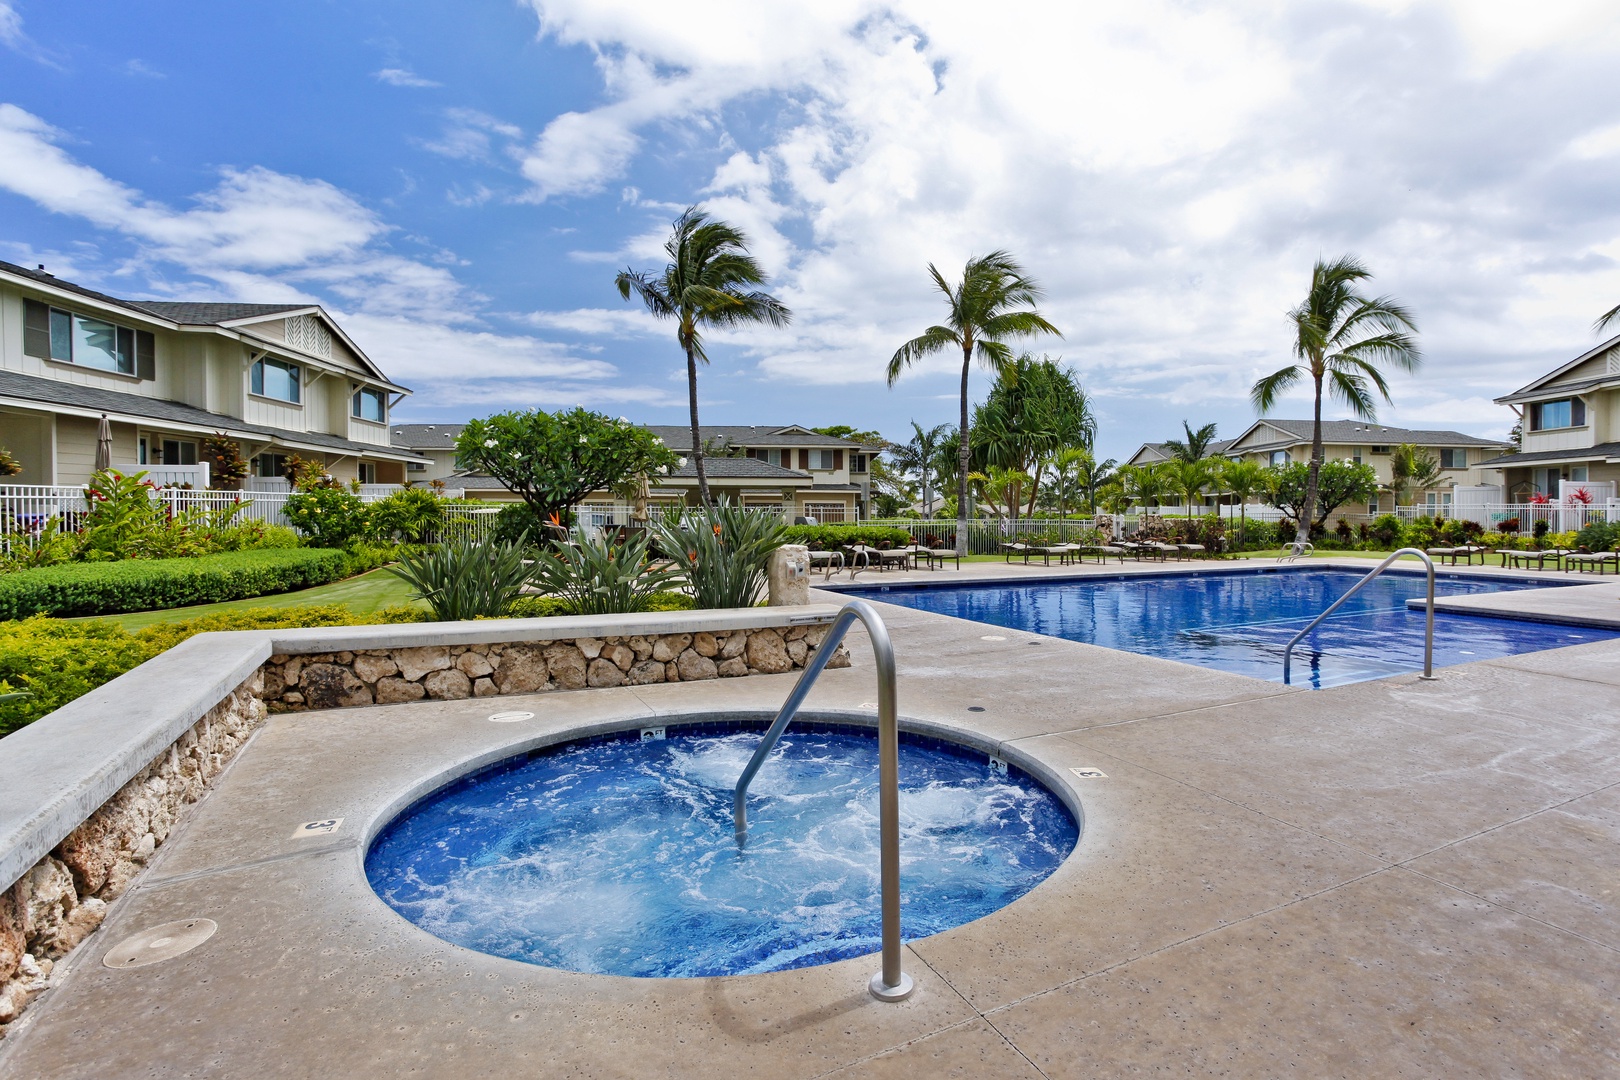 Kapolei Vacation Rentals, Hillside Villas 1538-2 - The luxurious hot tub and crystal blue pool at the resort.